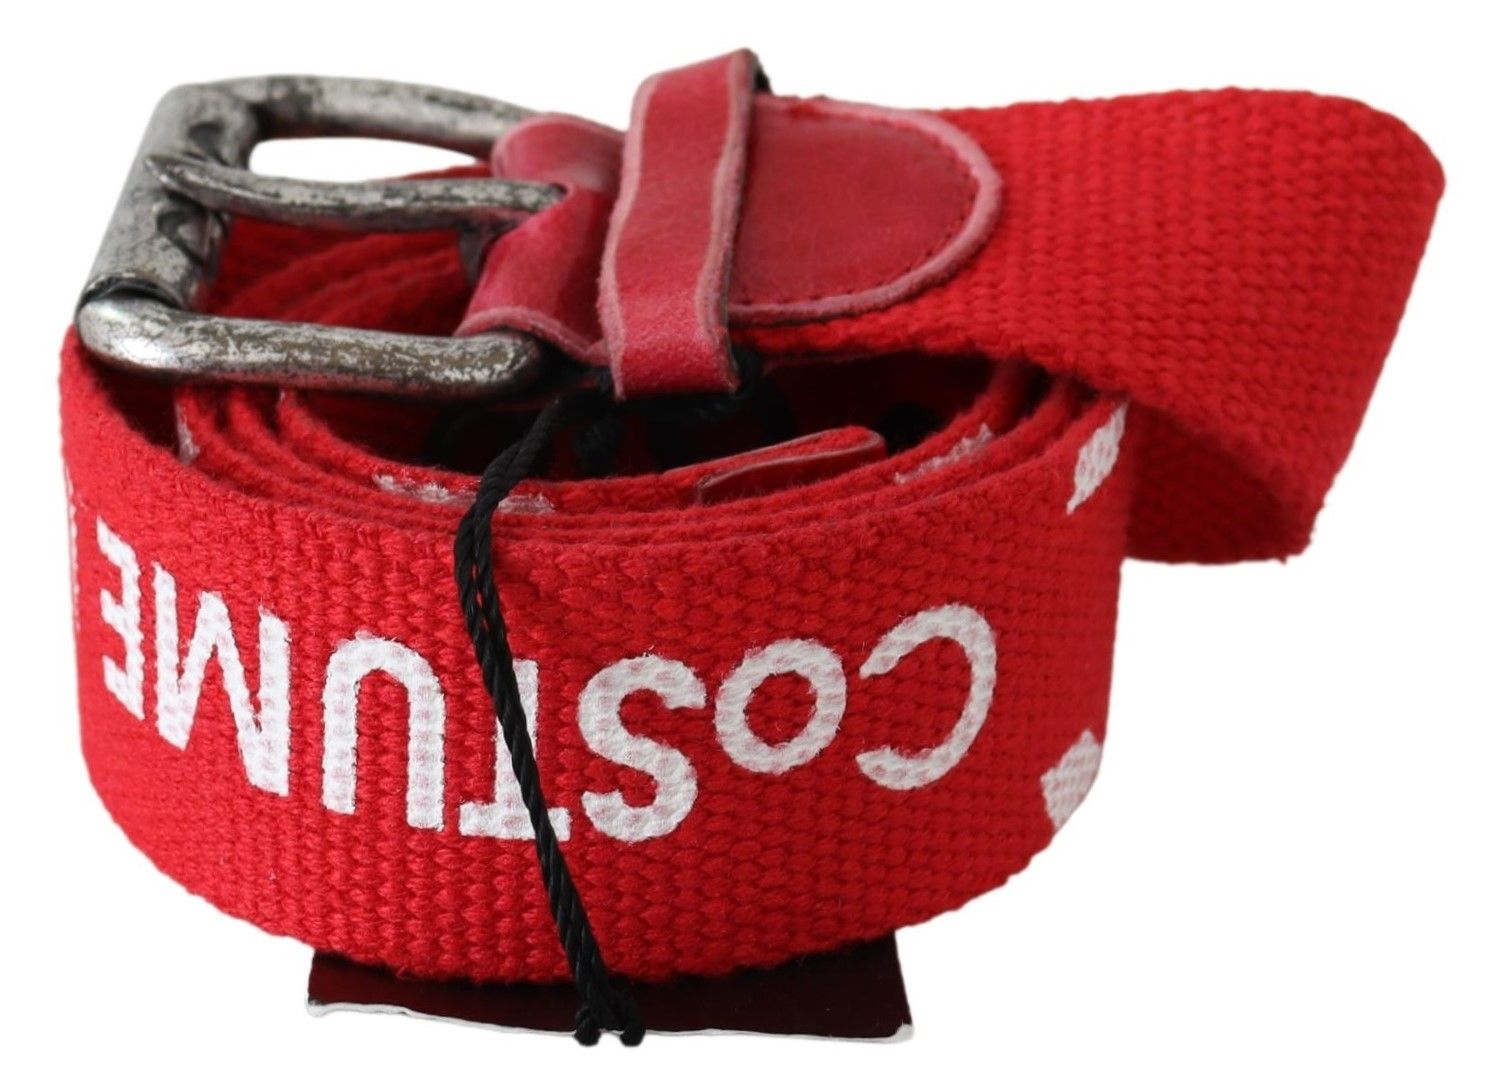 Costume National Red Woven Silver Rustic Logo Buckle Belt